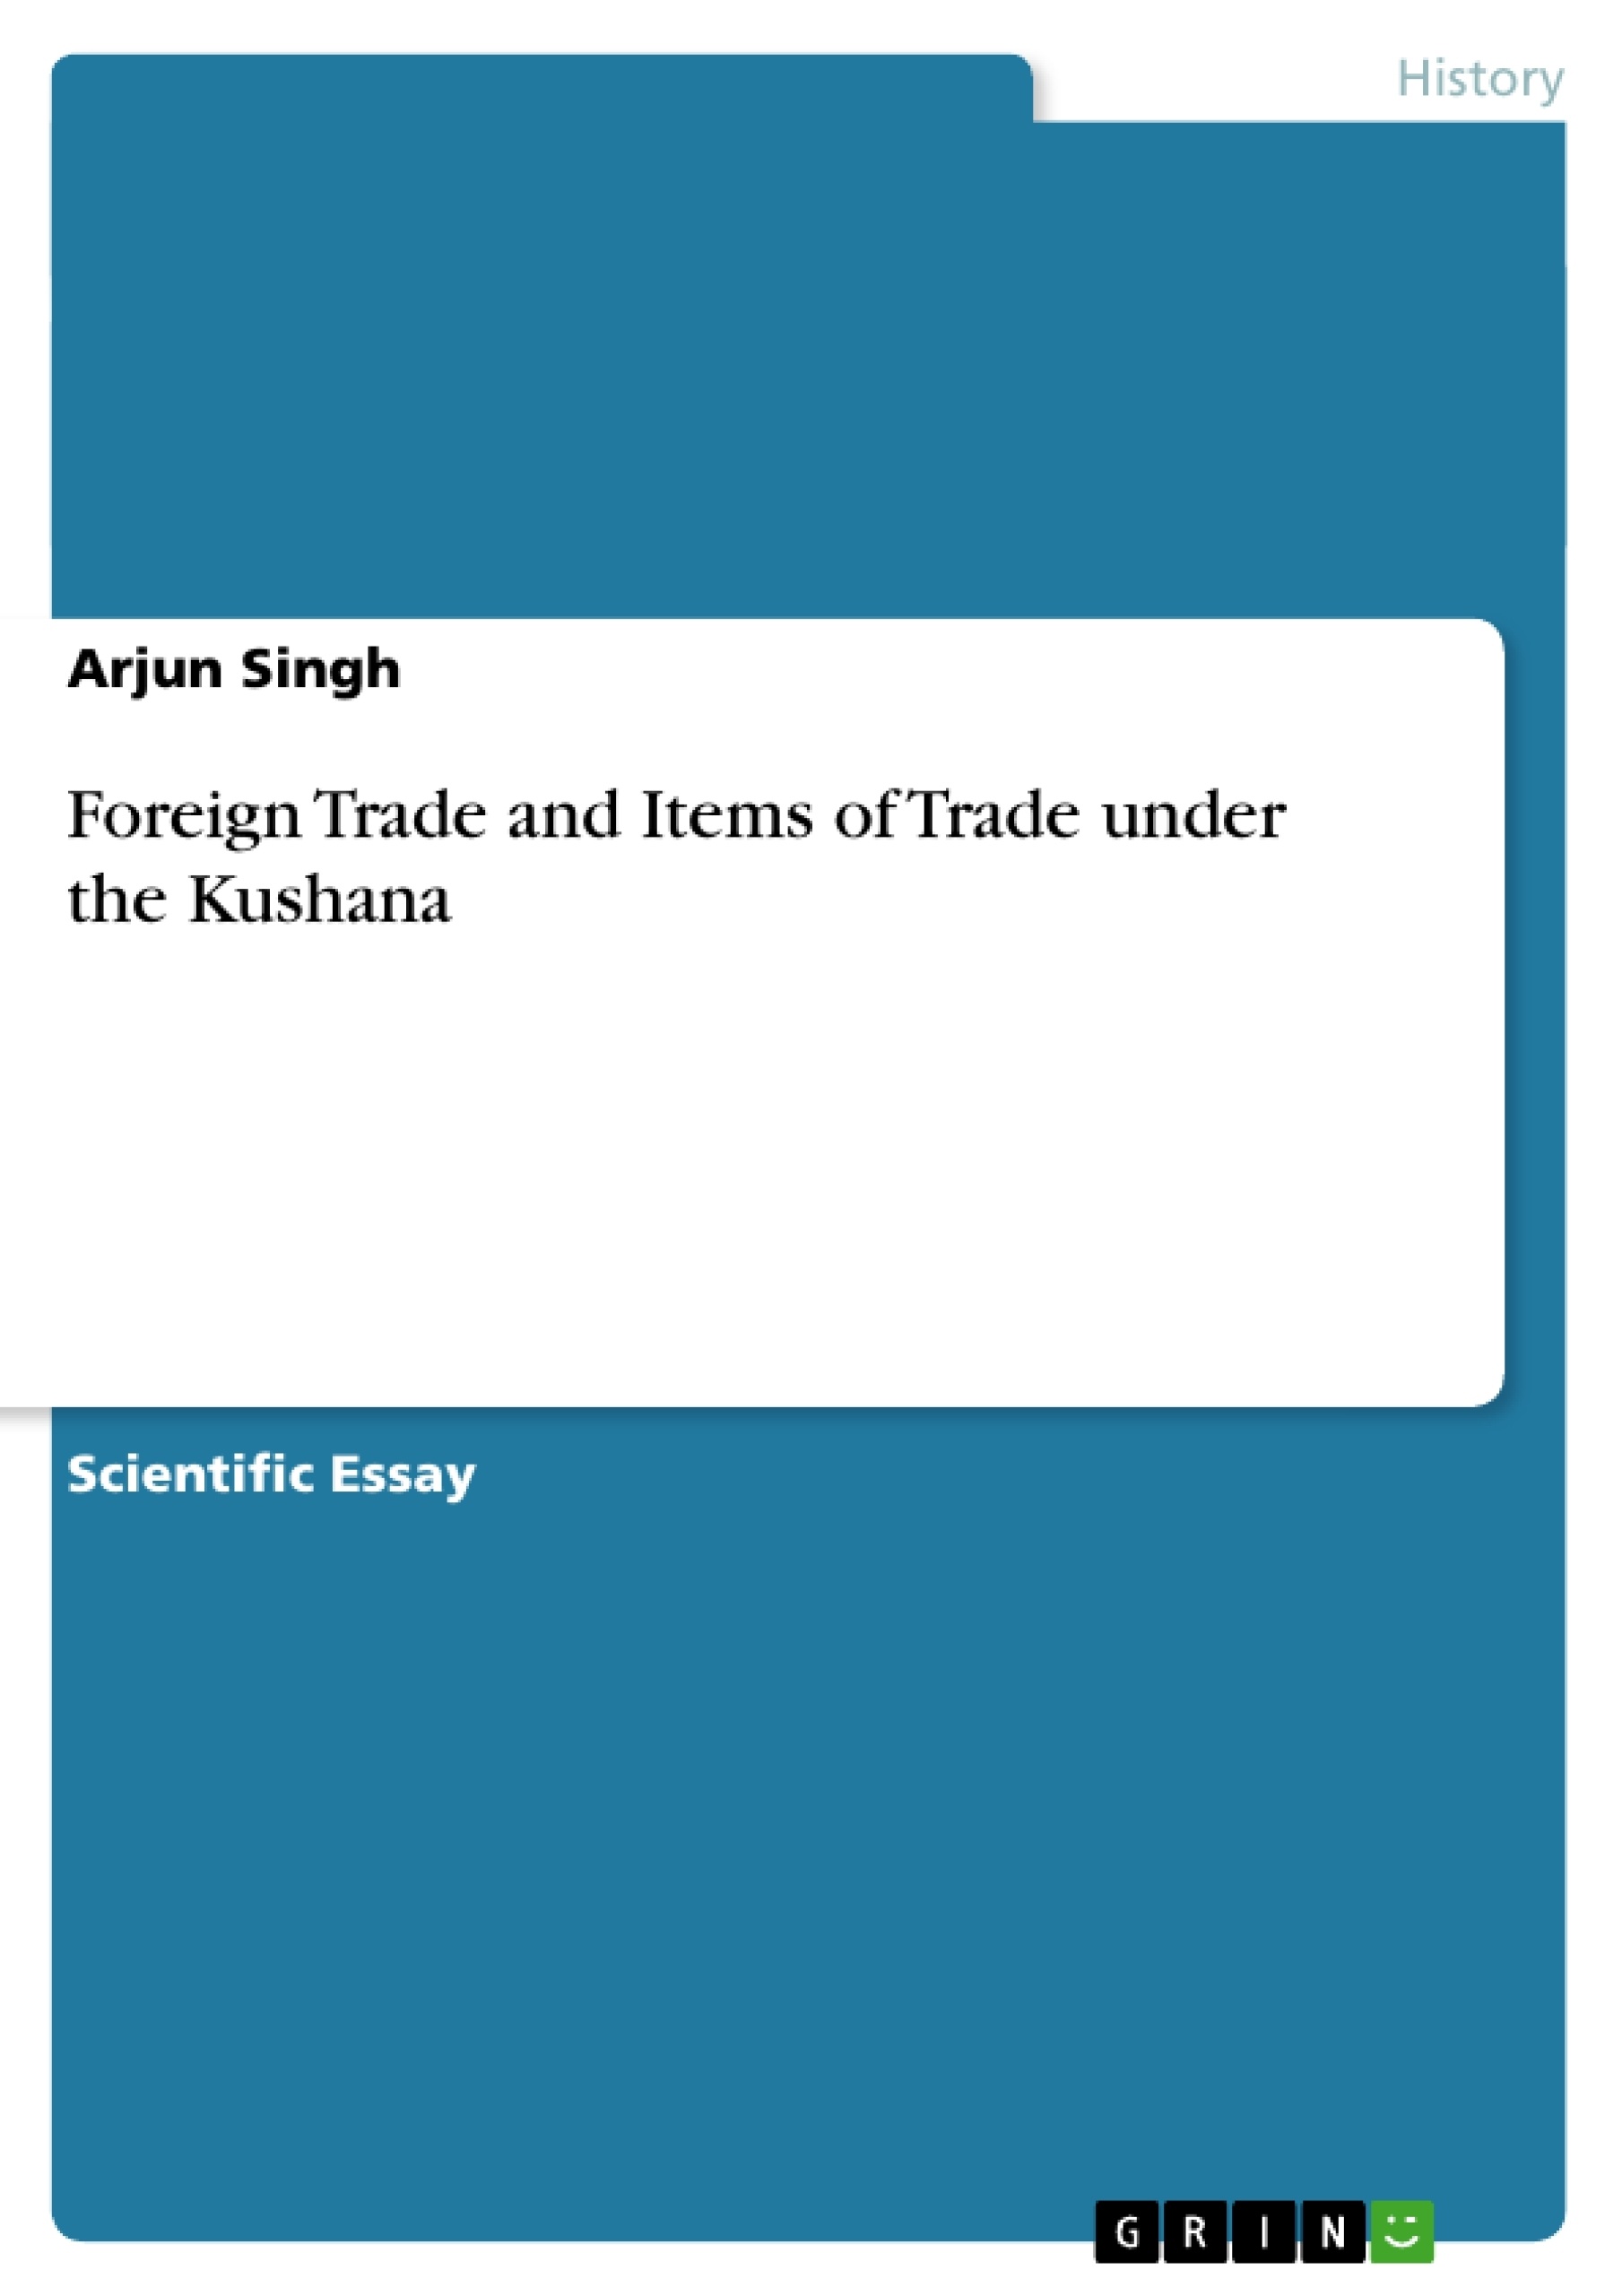 Título: Foreign Trade and Items of Trade under the Kushana